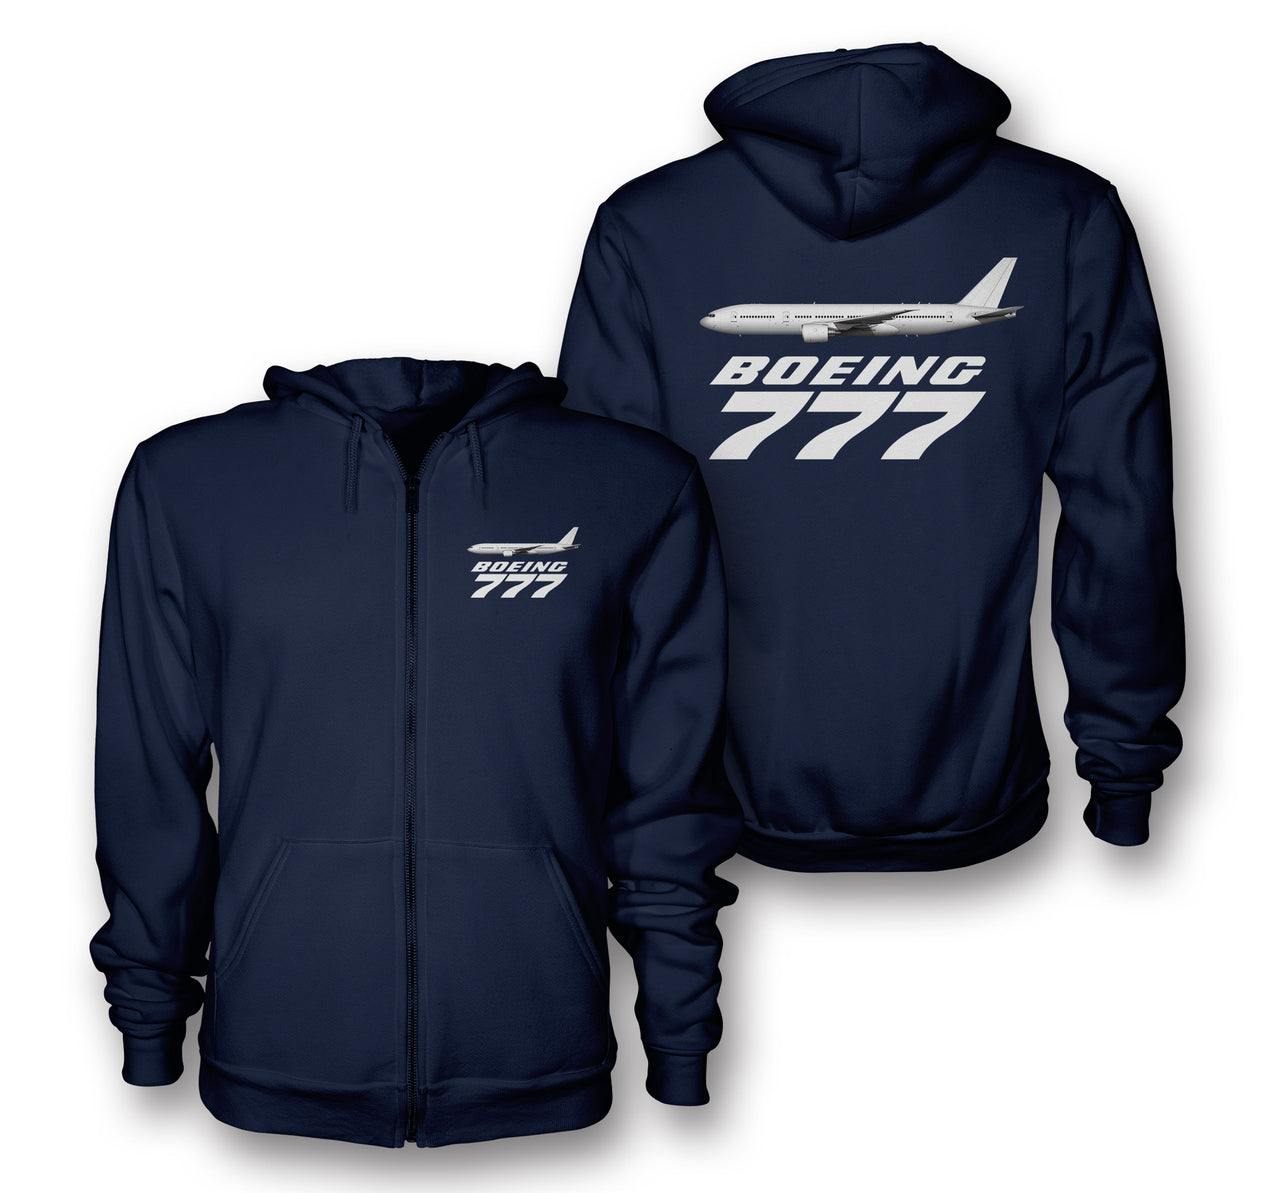 The Boeing 777 Designed Zipped Hoodies